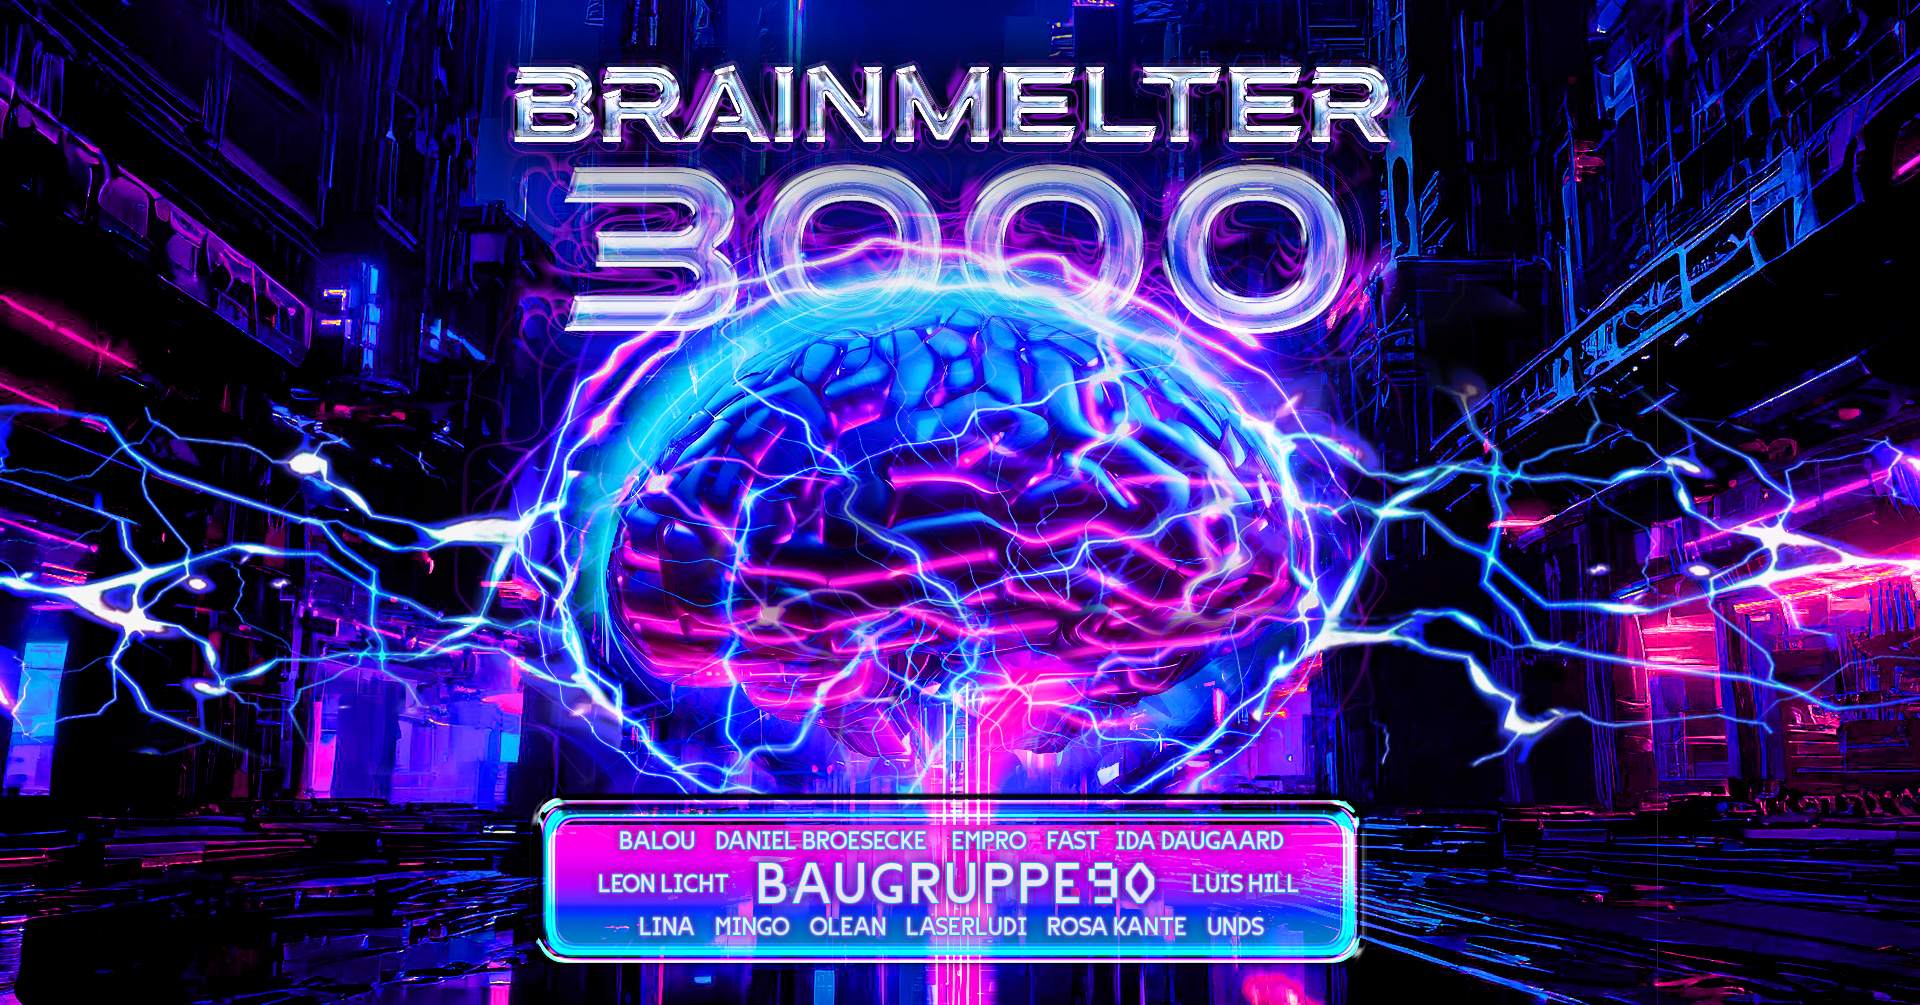 Renate X Brainmelter 3000 w/ BAUGRUPPE90 and many more - フライヤー表